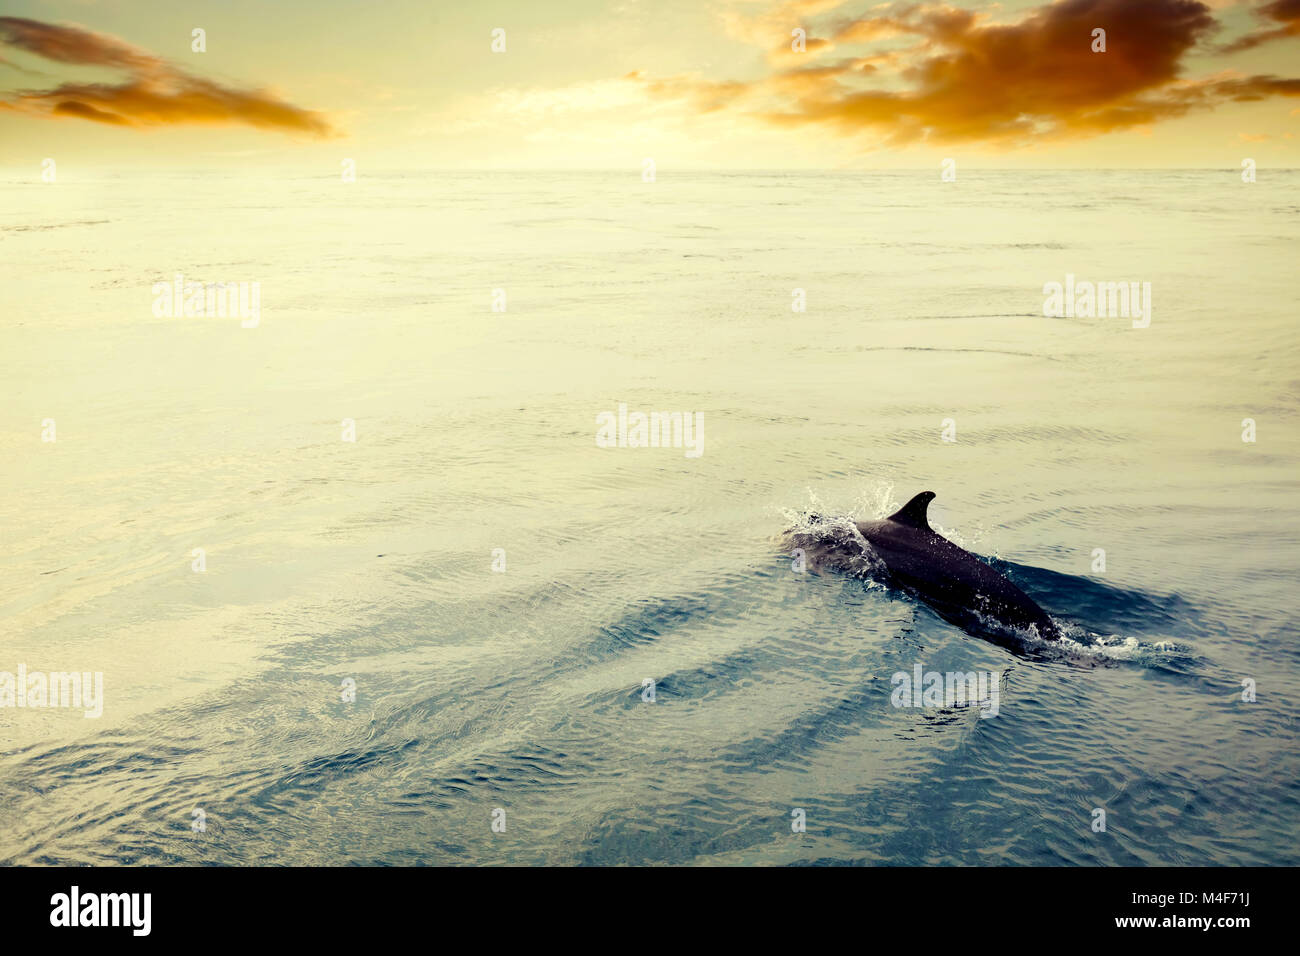 Dolphin jumping in the ocean at sunset. Maldives Stock Photo